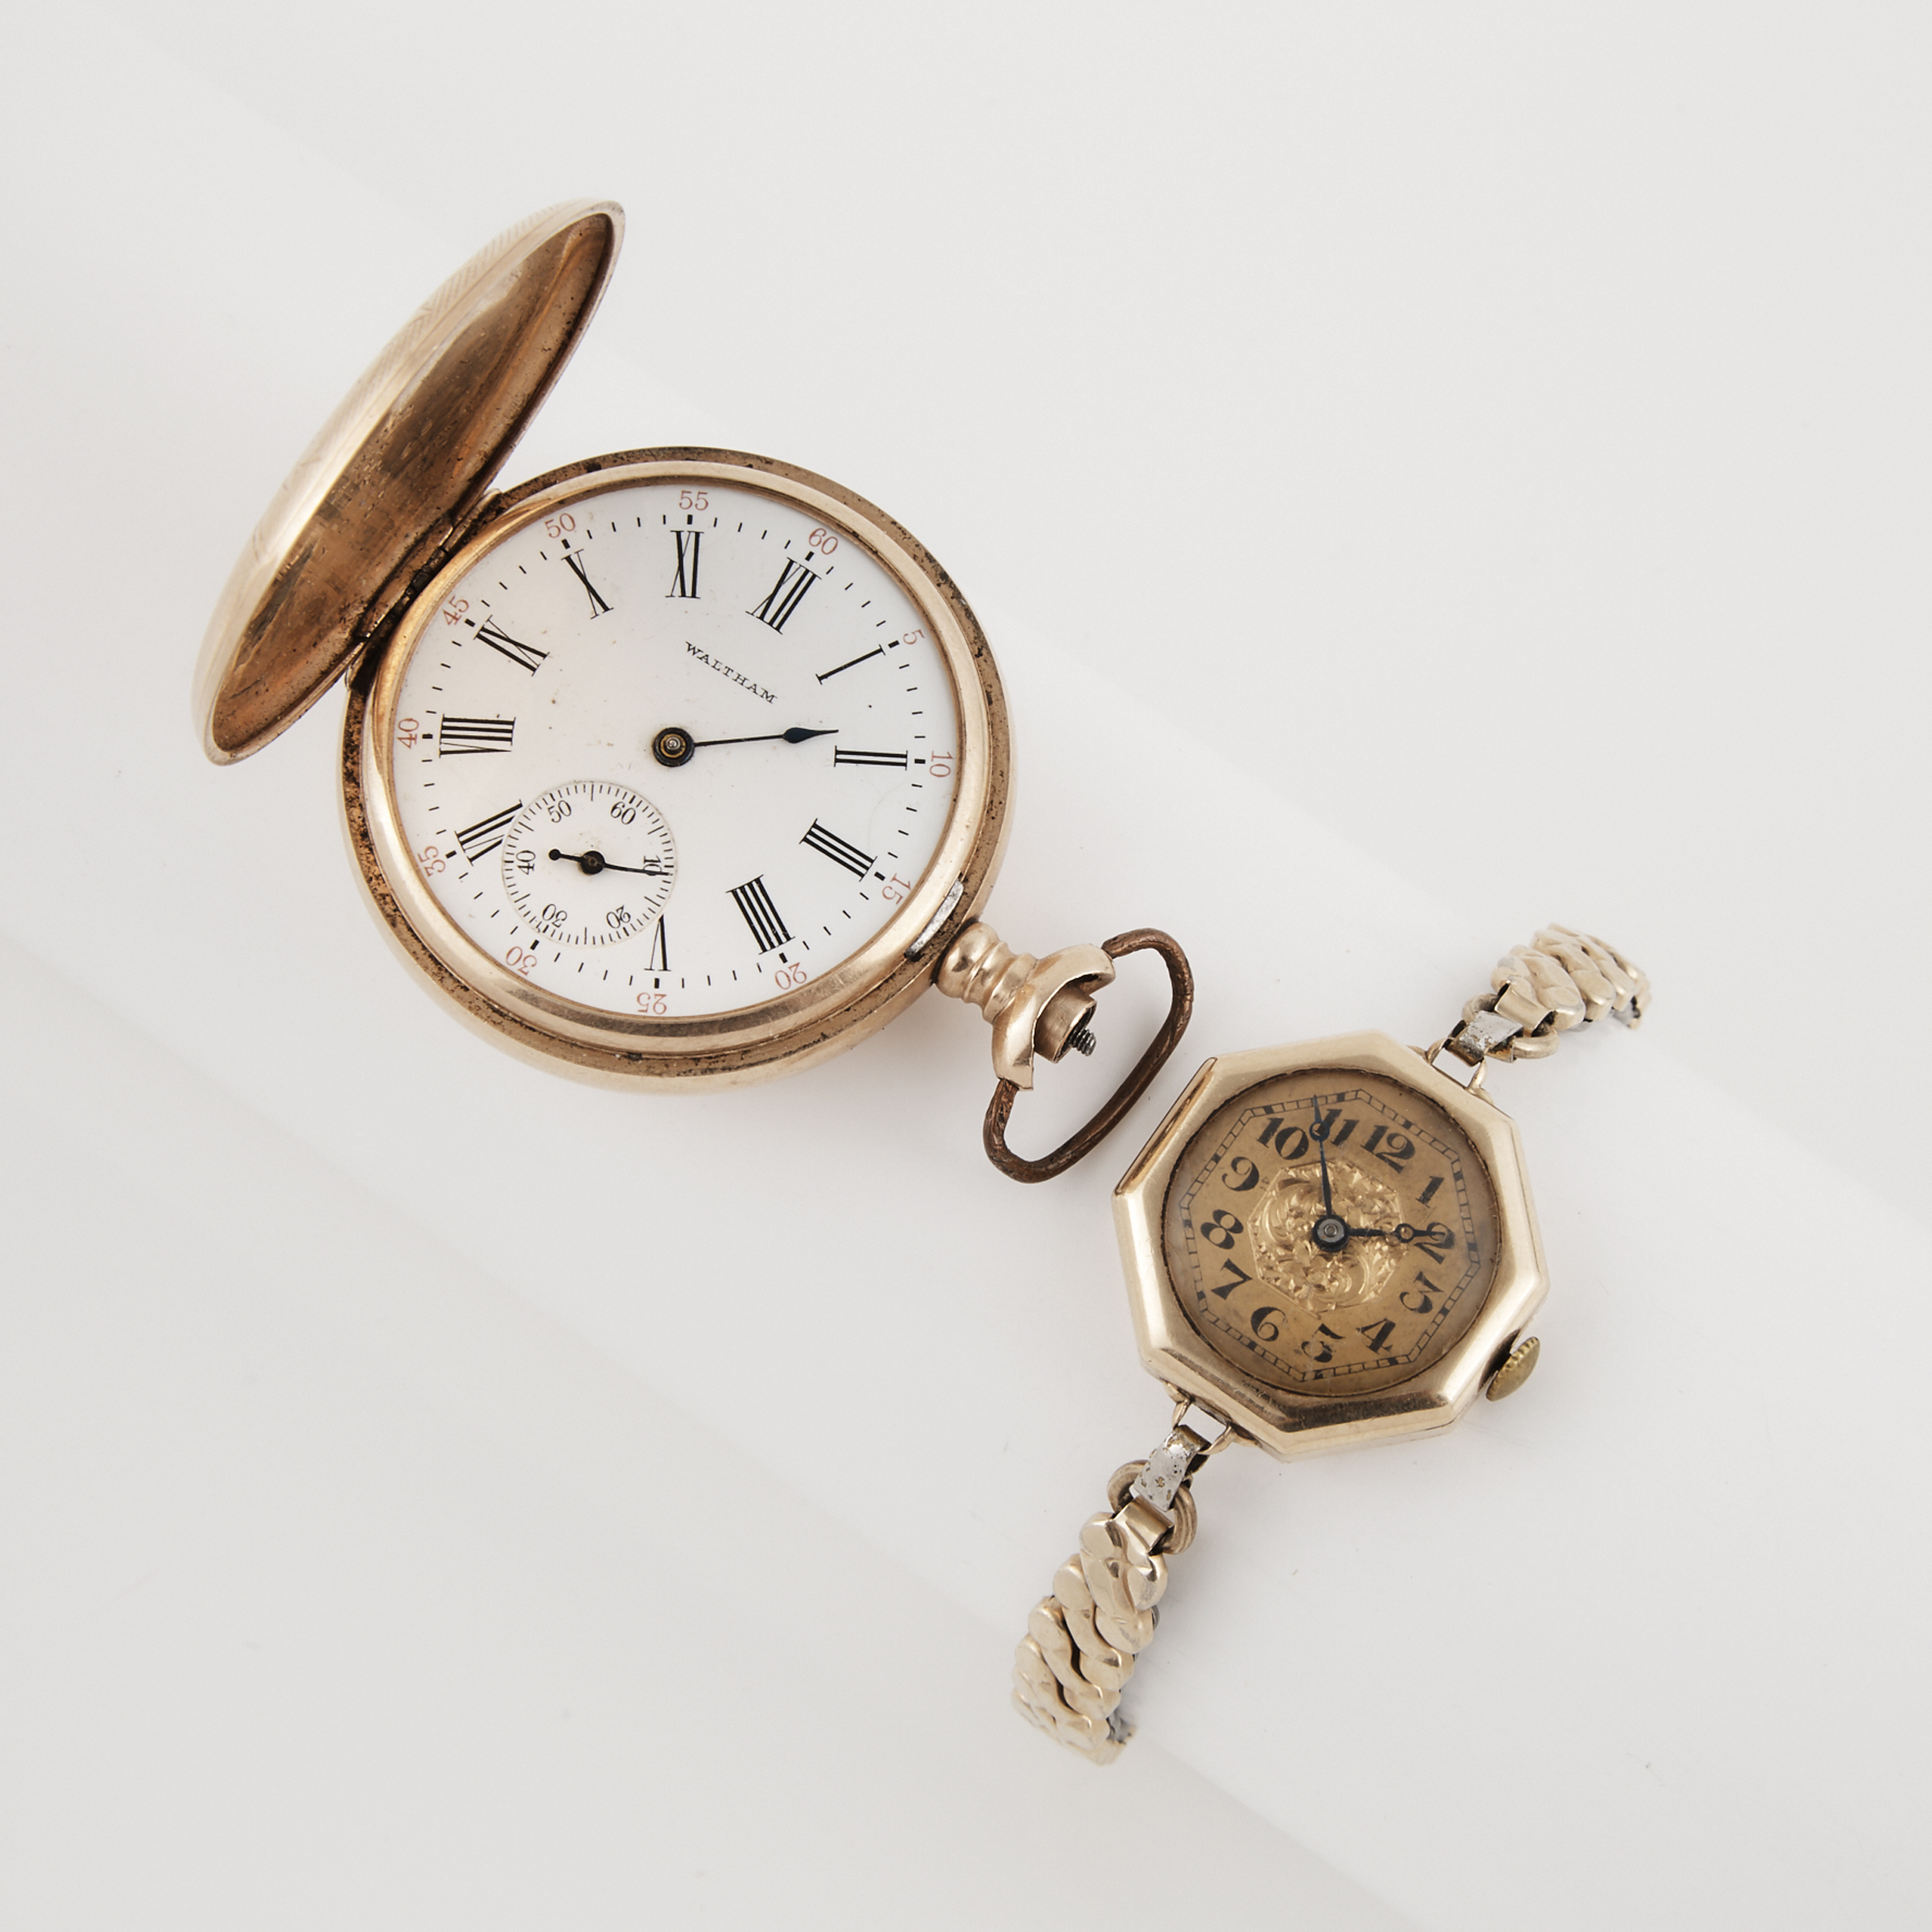 Two Watches In 14k Yellow Gold Cases